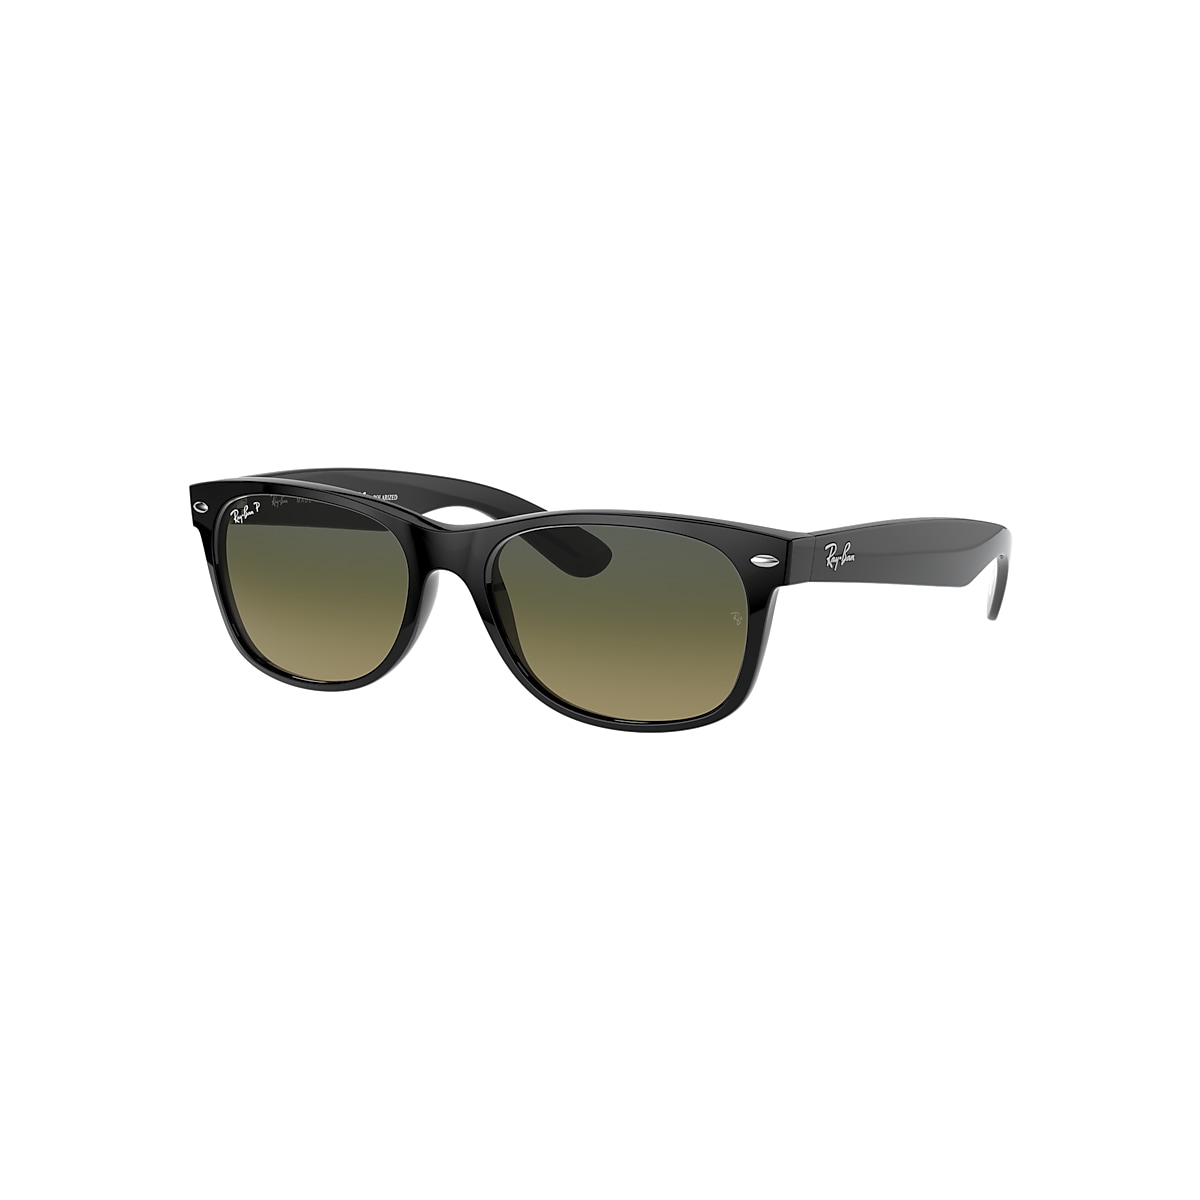 NEW WAYFARER @COLLECTION Sunglasses in Black and Blue 